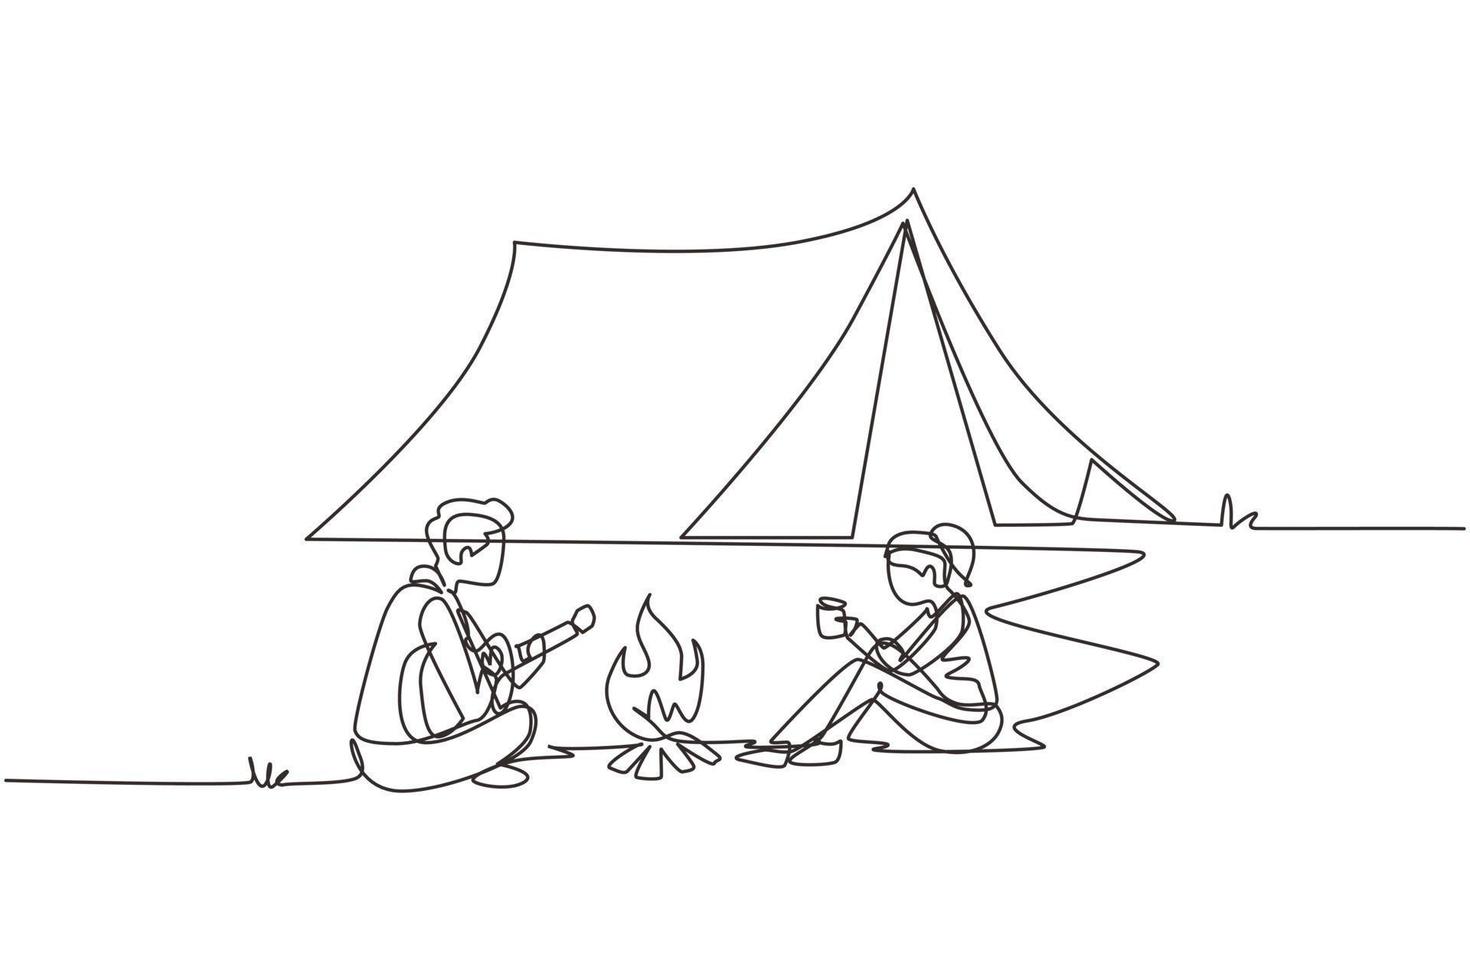 Single continuous line drawing camping couple around campfire tents. Man playing guitar and woman drinking hot tea getting warm near bonfire sitting on ground. One line draw design vector illustration